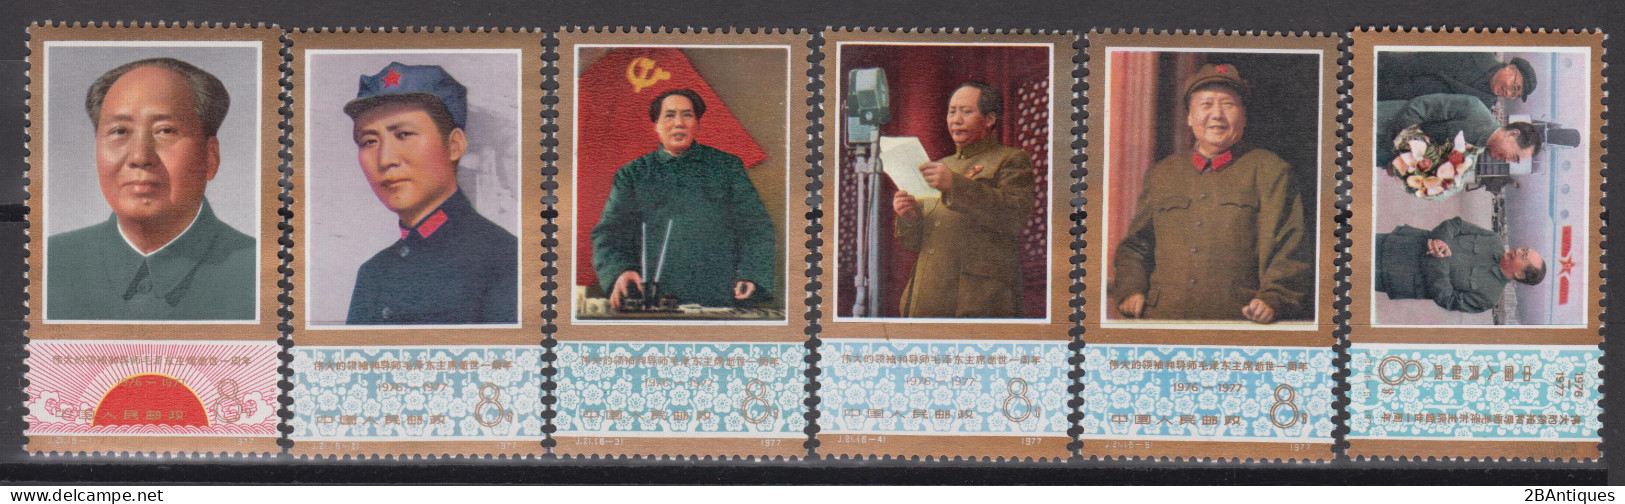 PR CHINA 1977 - The 1st Anniversary Of The Death Of Mao Tse-tung  MNH** OG - Neufs